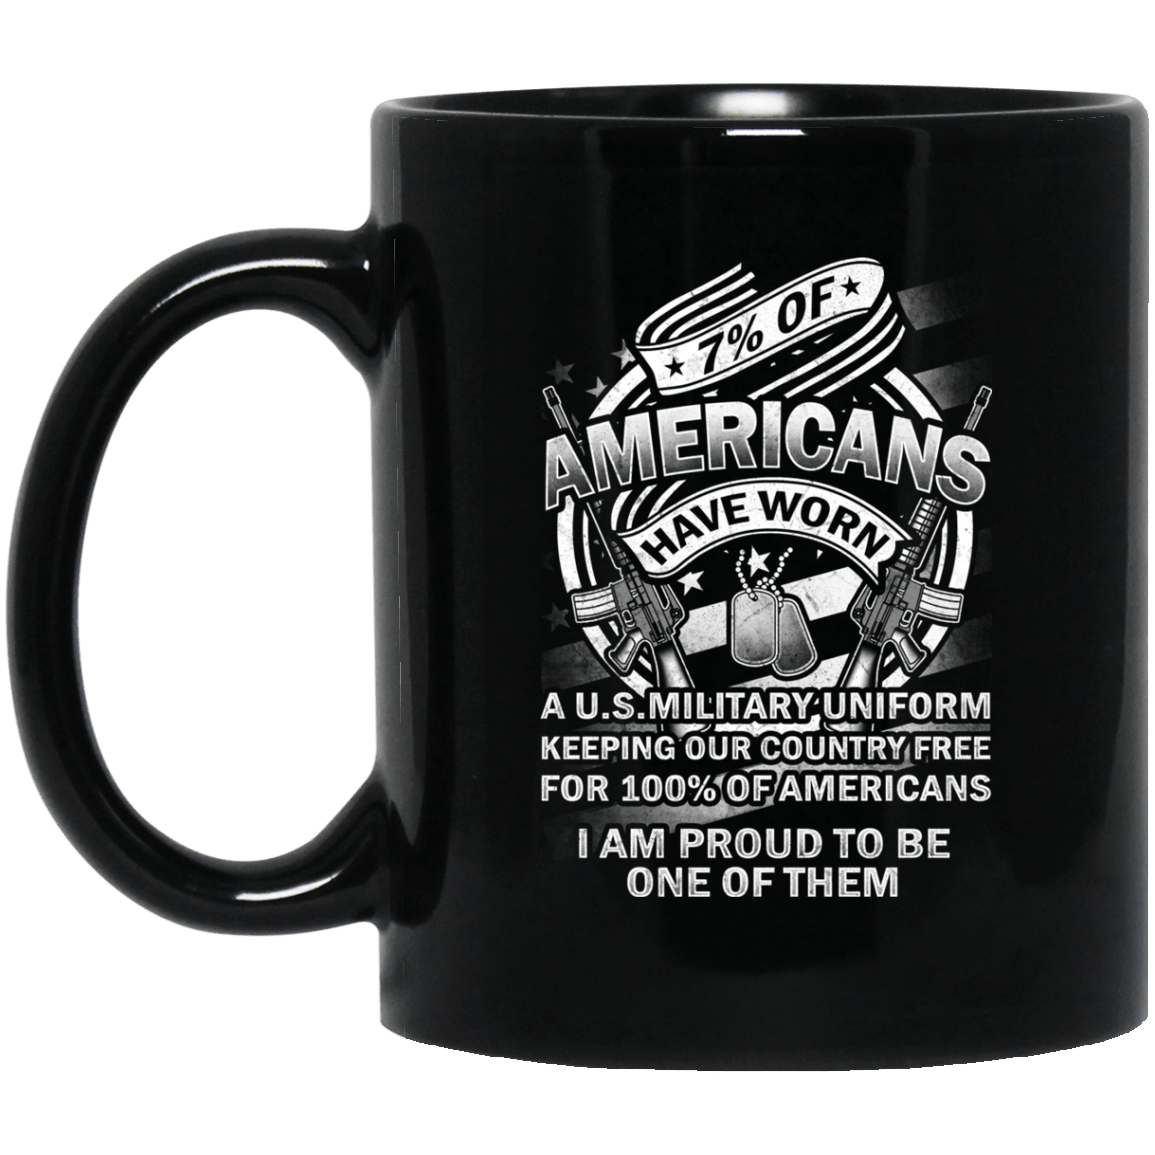 7% of Americans Have Worn Proud To Be one of Them Coffee Mug Black – Change Colour